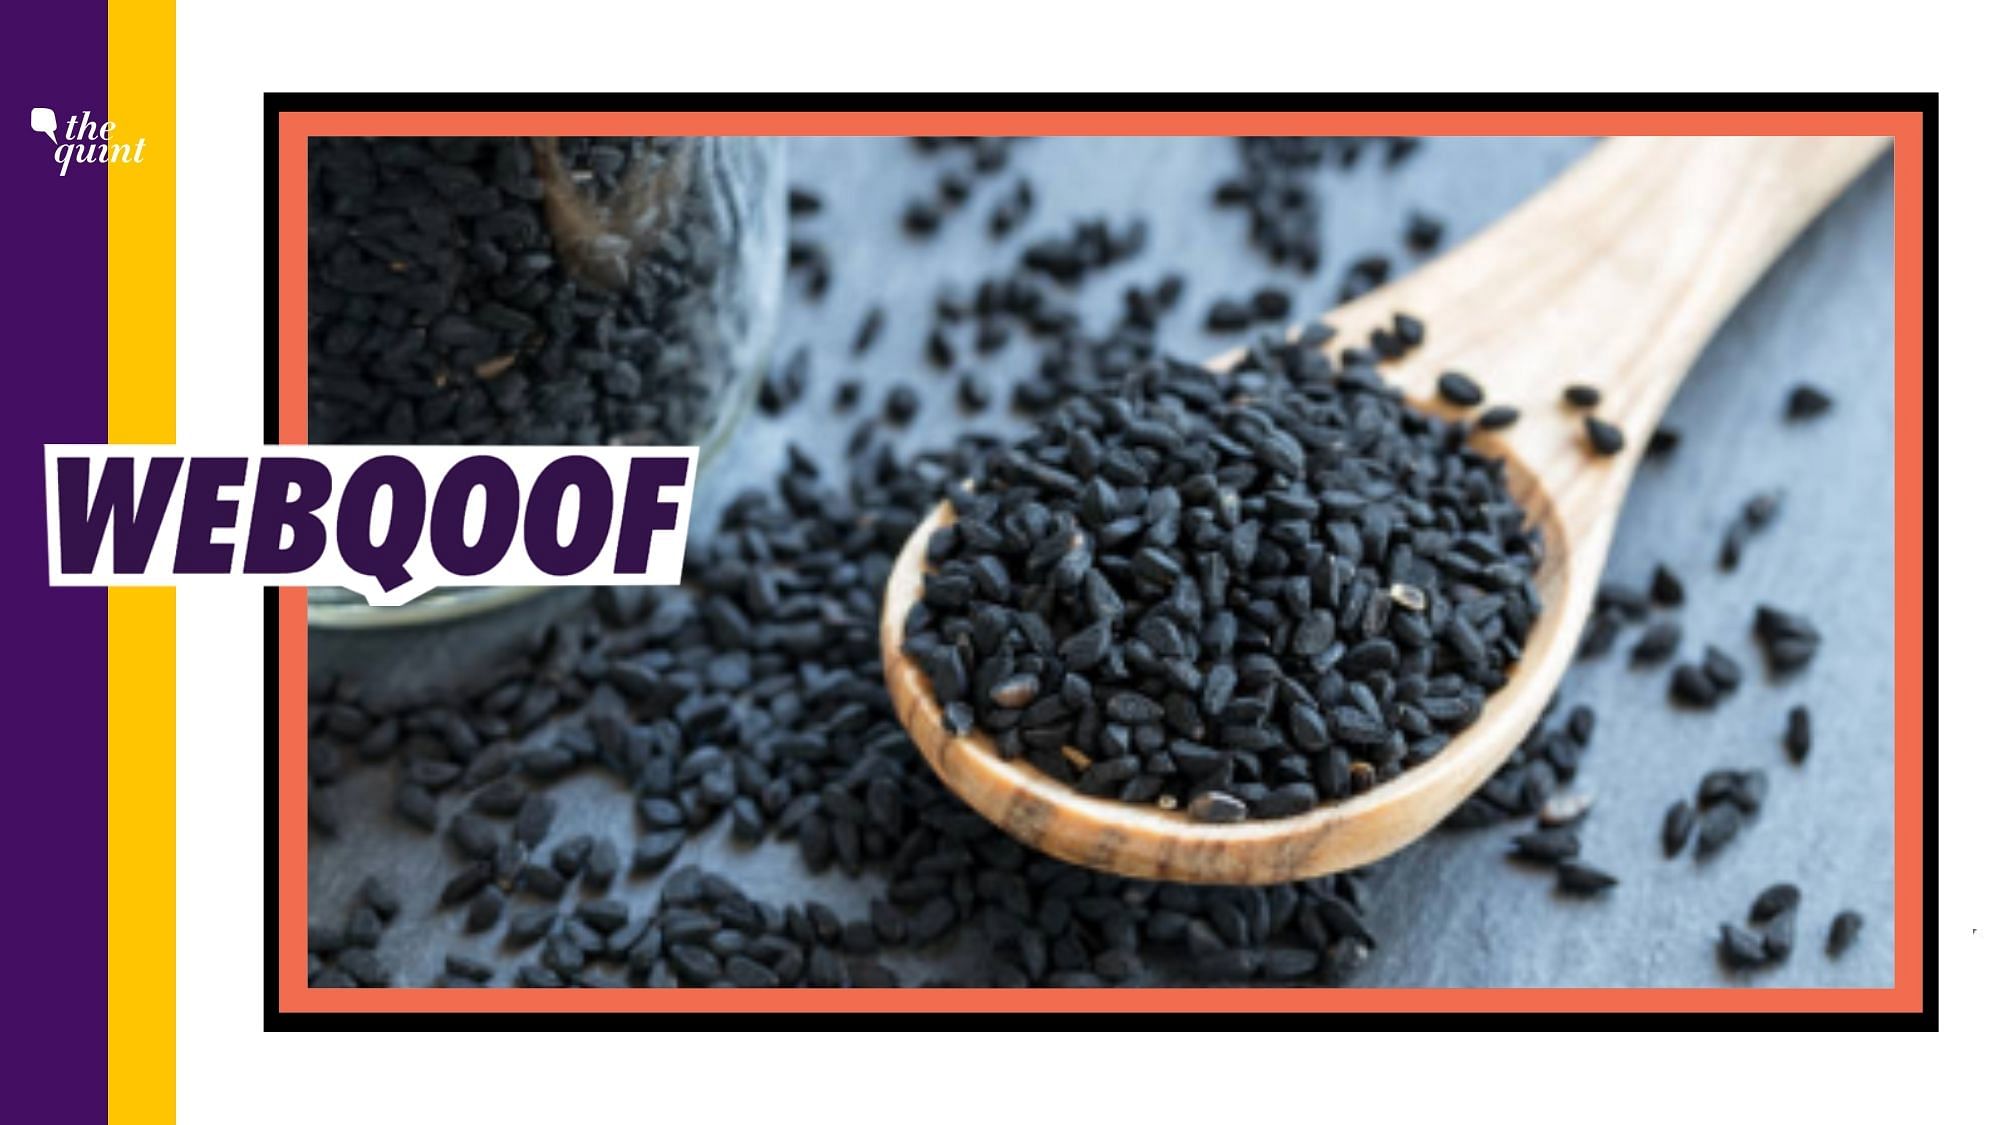 A viral message falsely claimed that Kalonji seeds have HCQ and can thus be used to cure coronavirus.